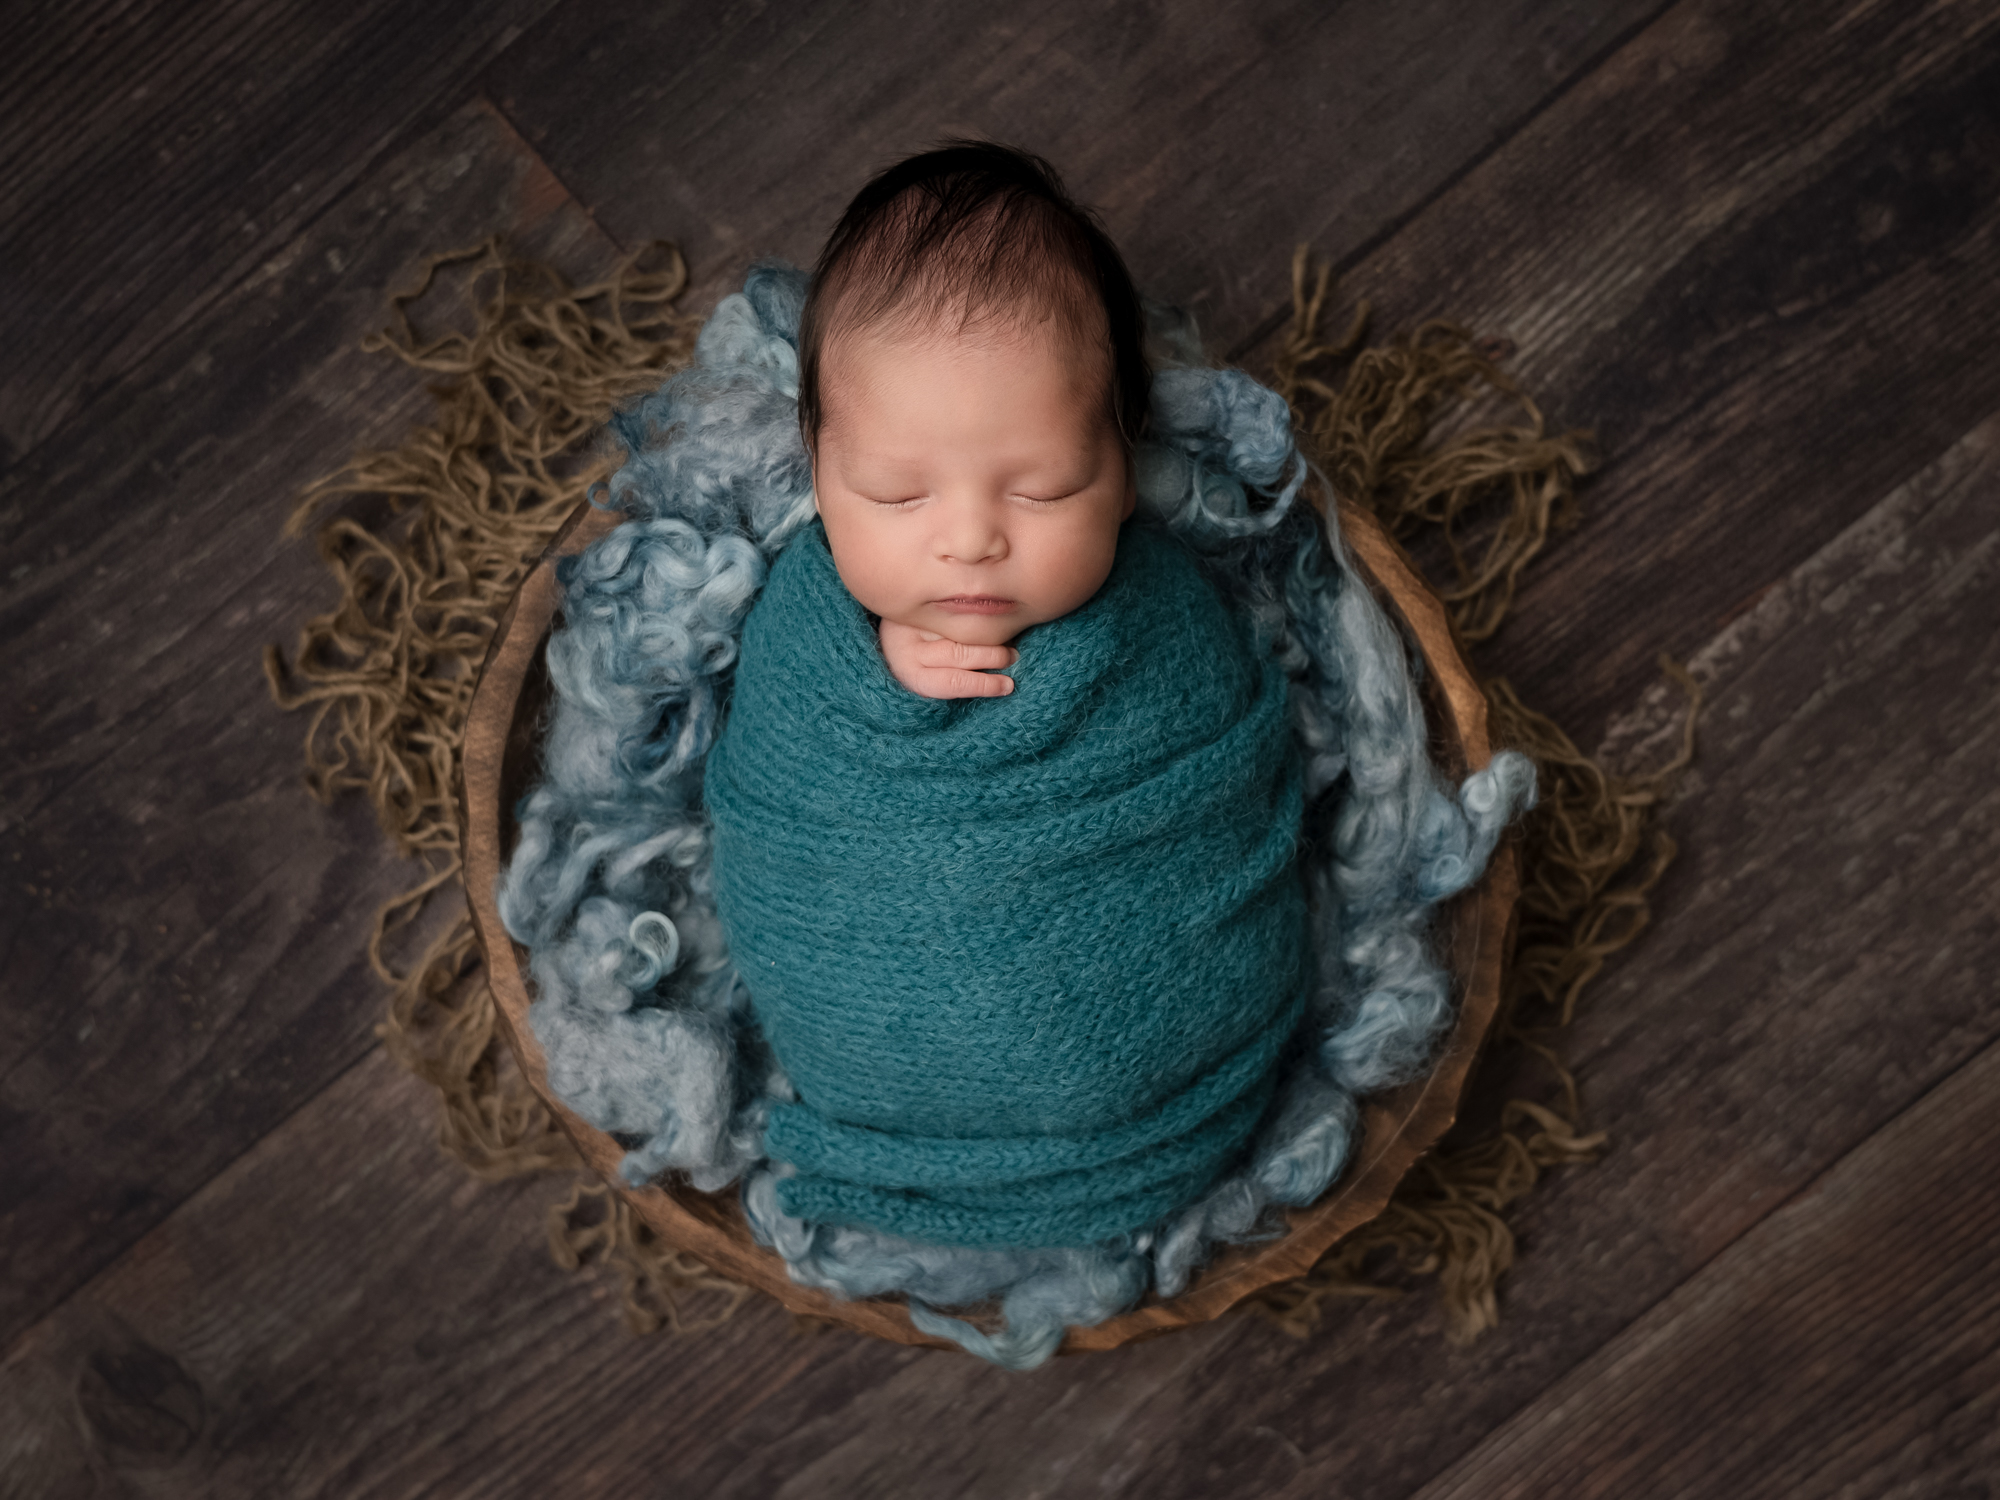 Wrapped up Newborn Photography done by Hayley Scott